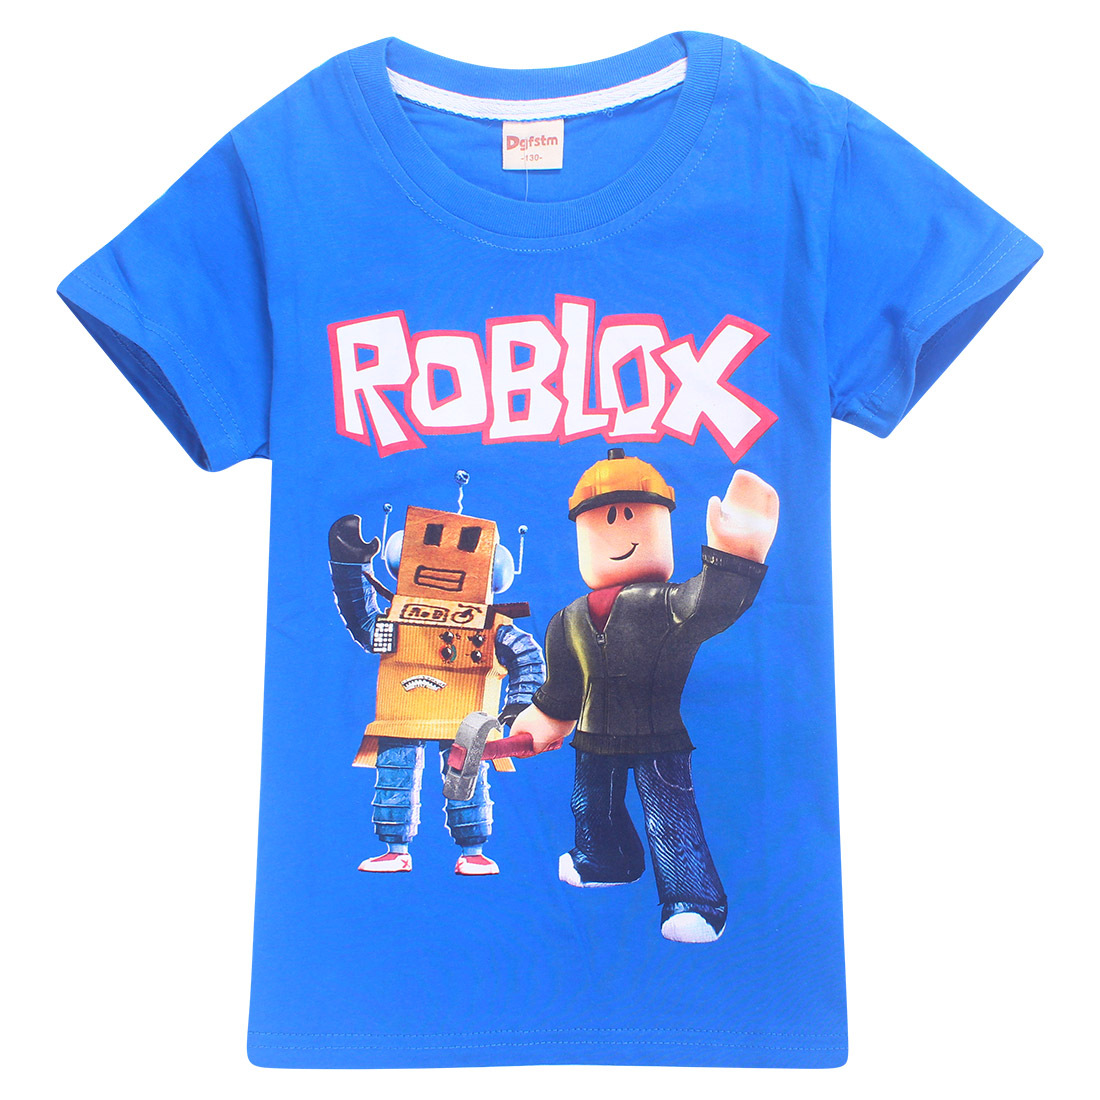 Roblox T Shirts For Kids Eyegemix Com - codes for clothes on roblox thrasher boys